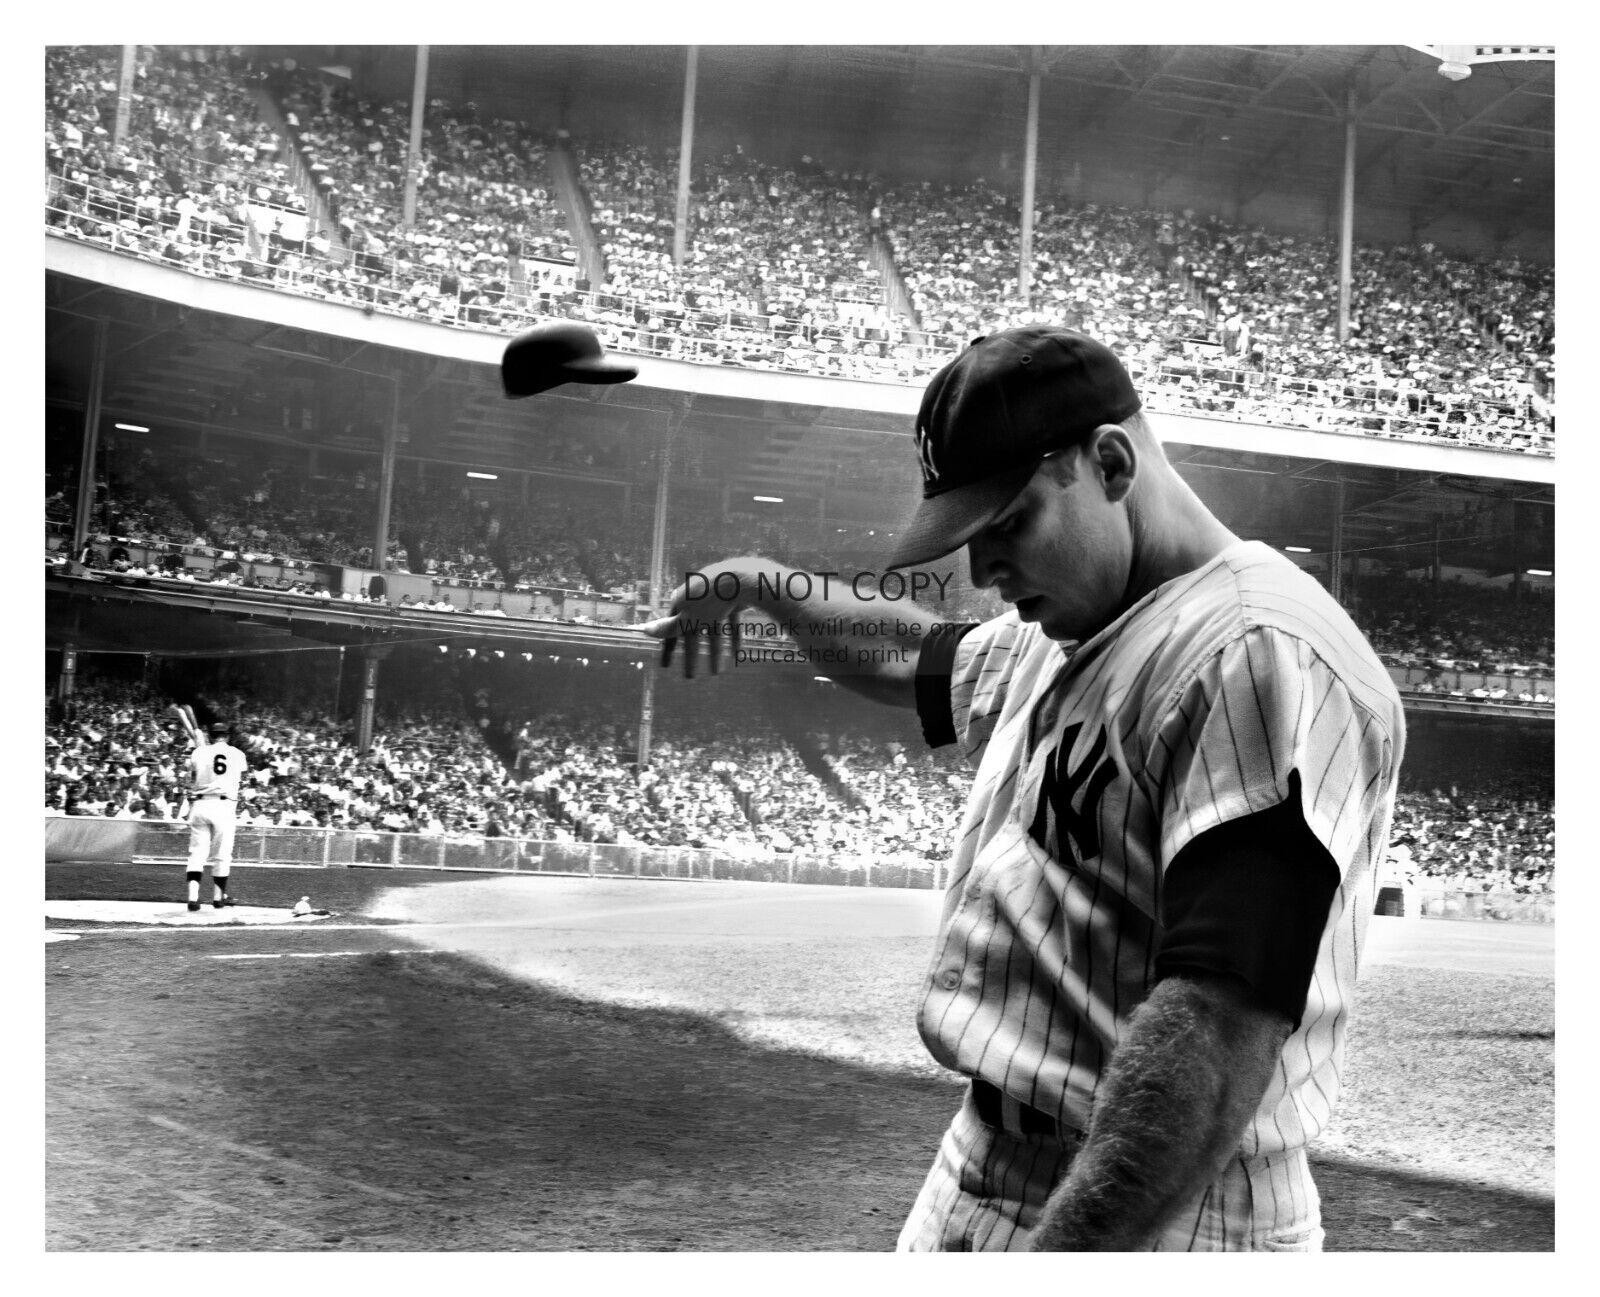 MICKEY MANTLE THROWING A HAT NEW YORK YANKEES BASEBALL 8X10 PHOTO